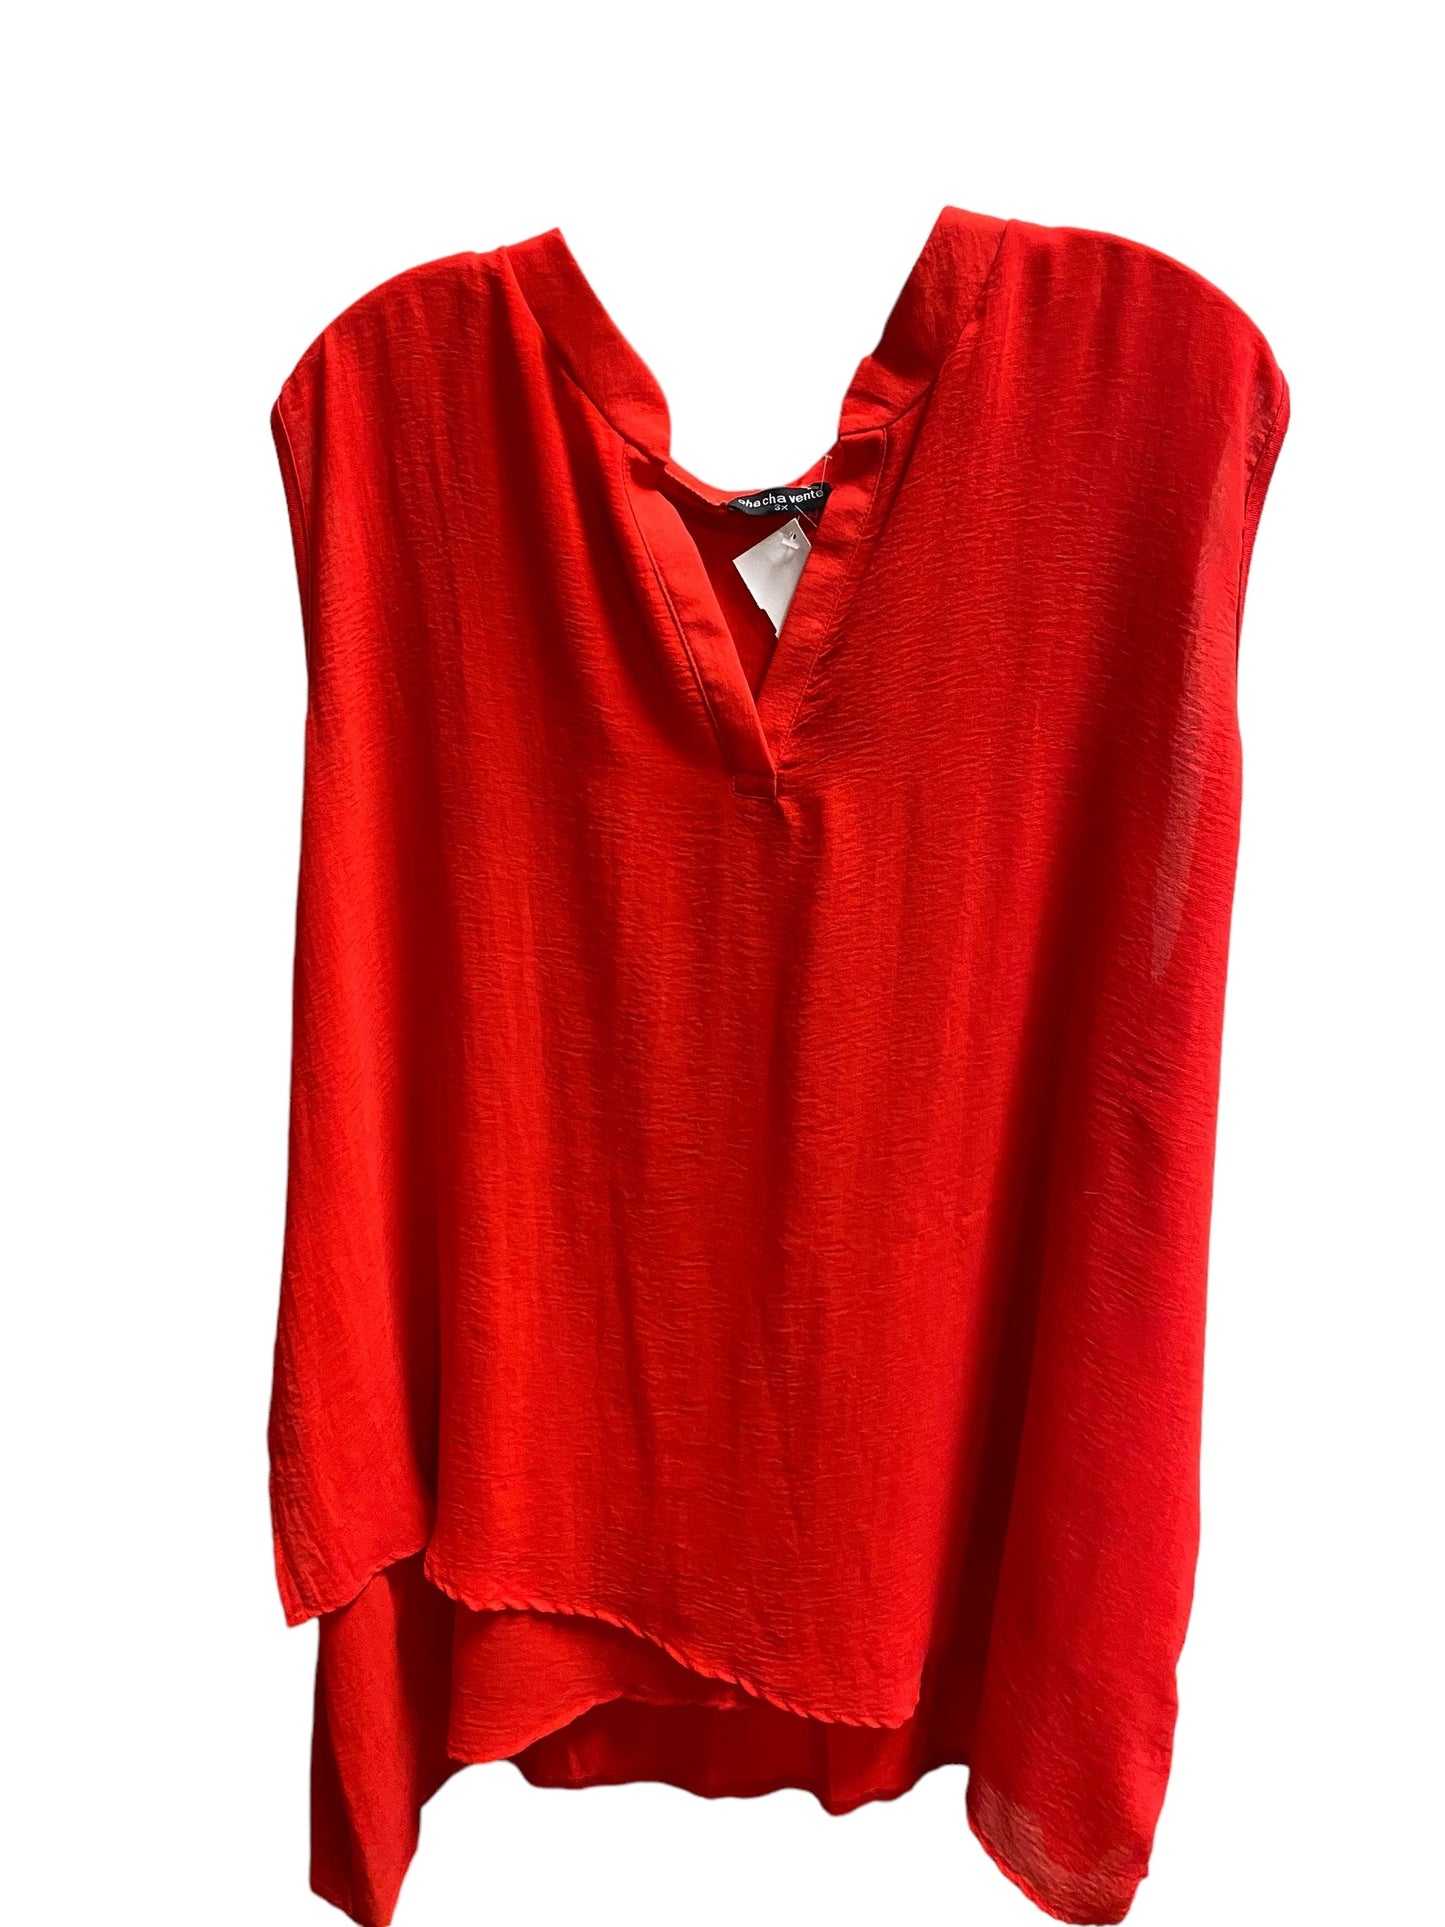 Red Top Sleeveless Cha Cha Vente, Size 3x